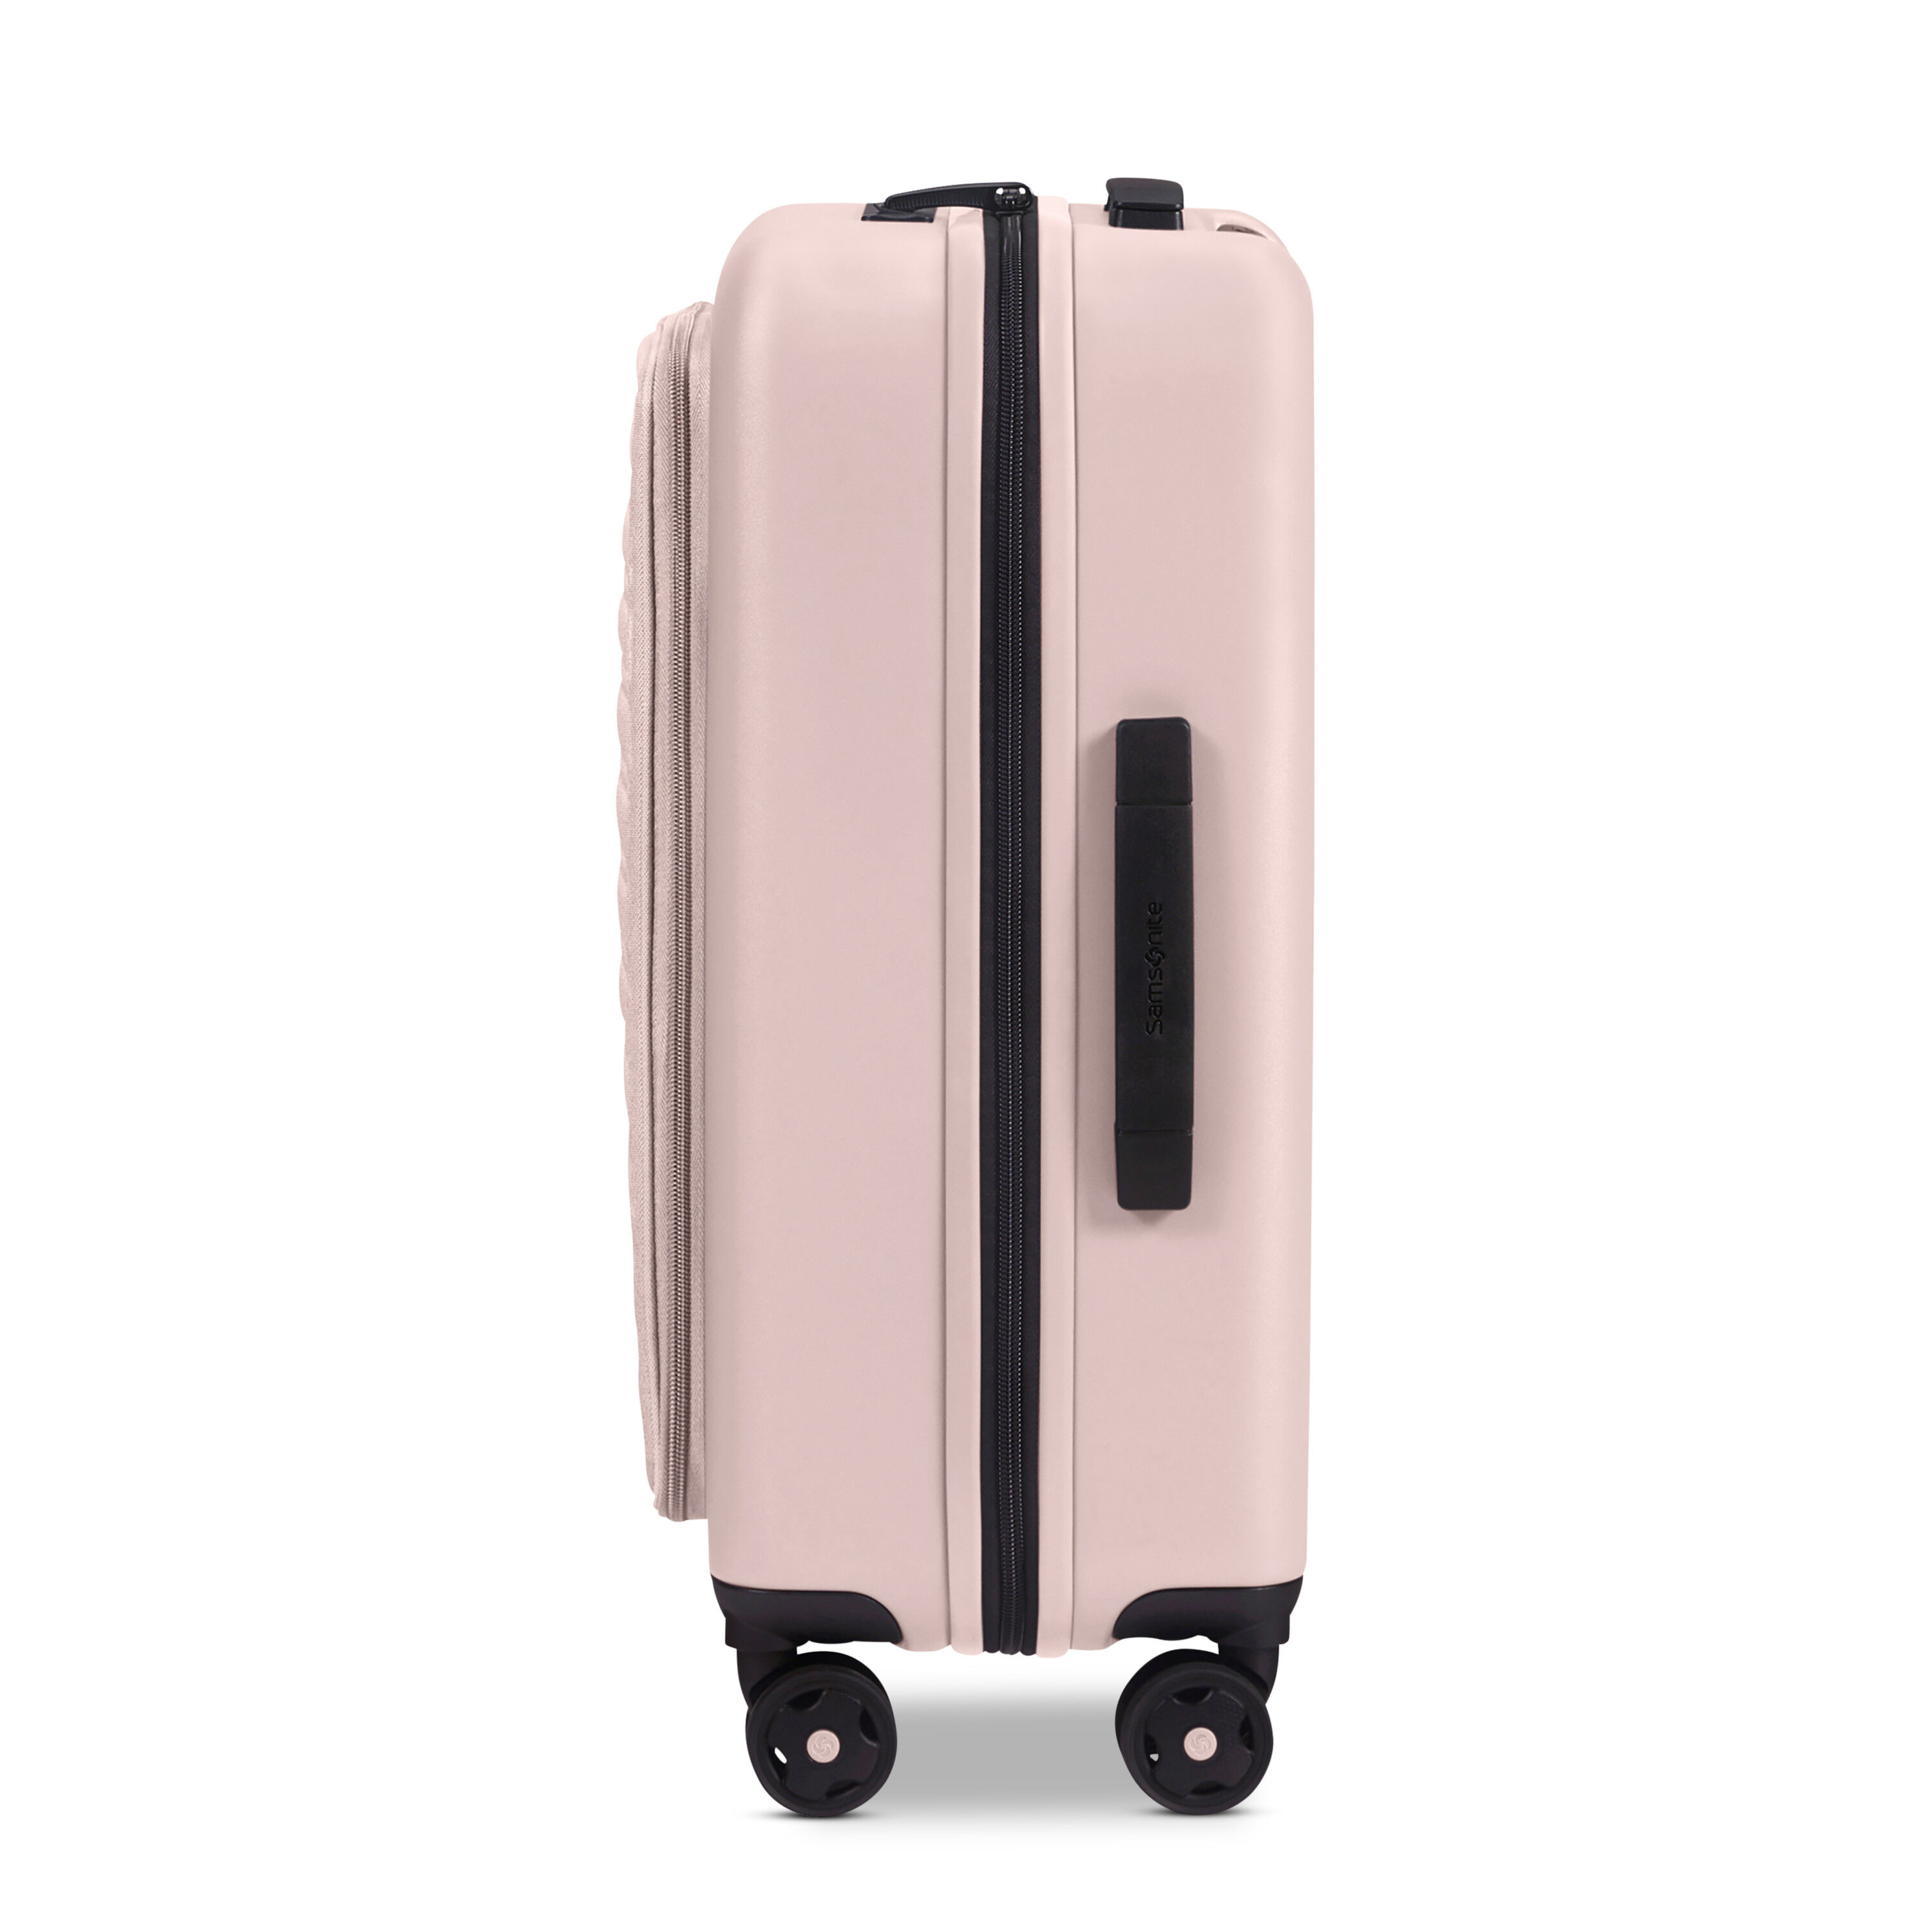 Stack'd Quick Entry Carry-on Spinner